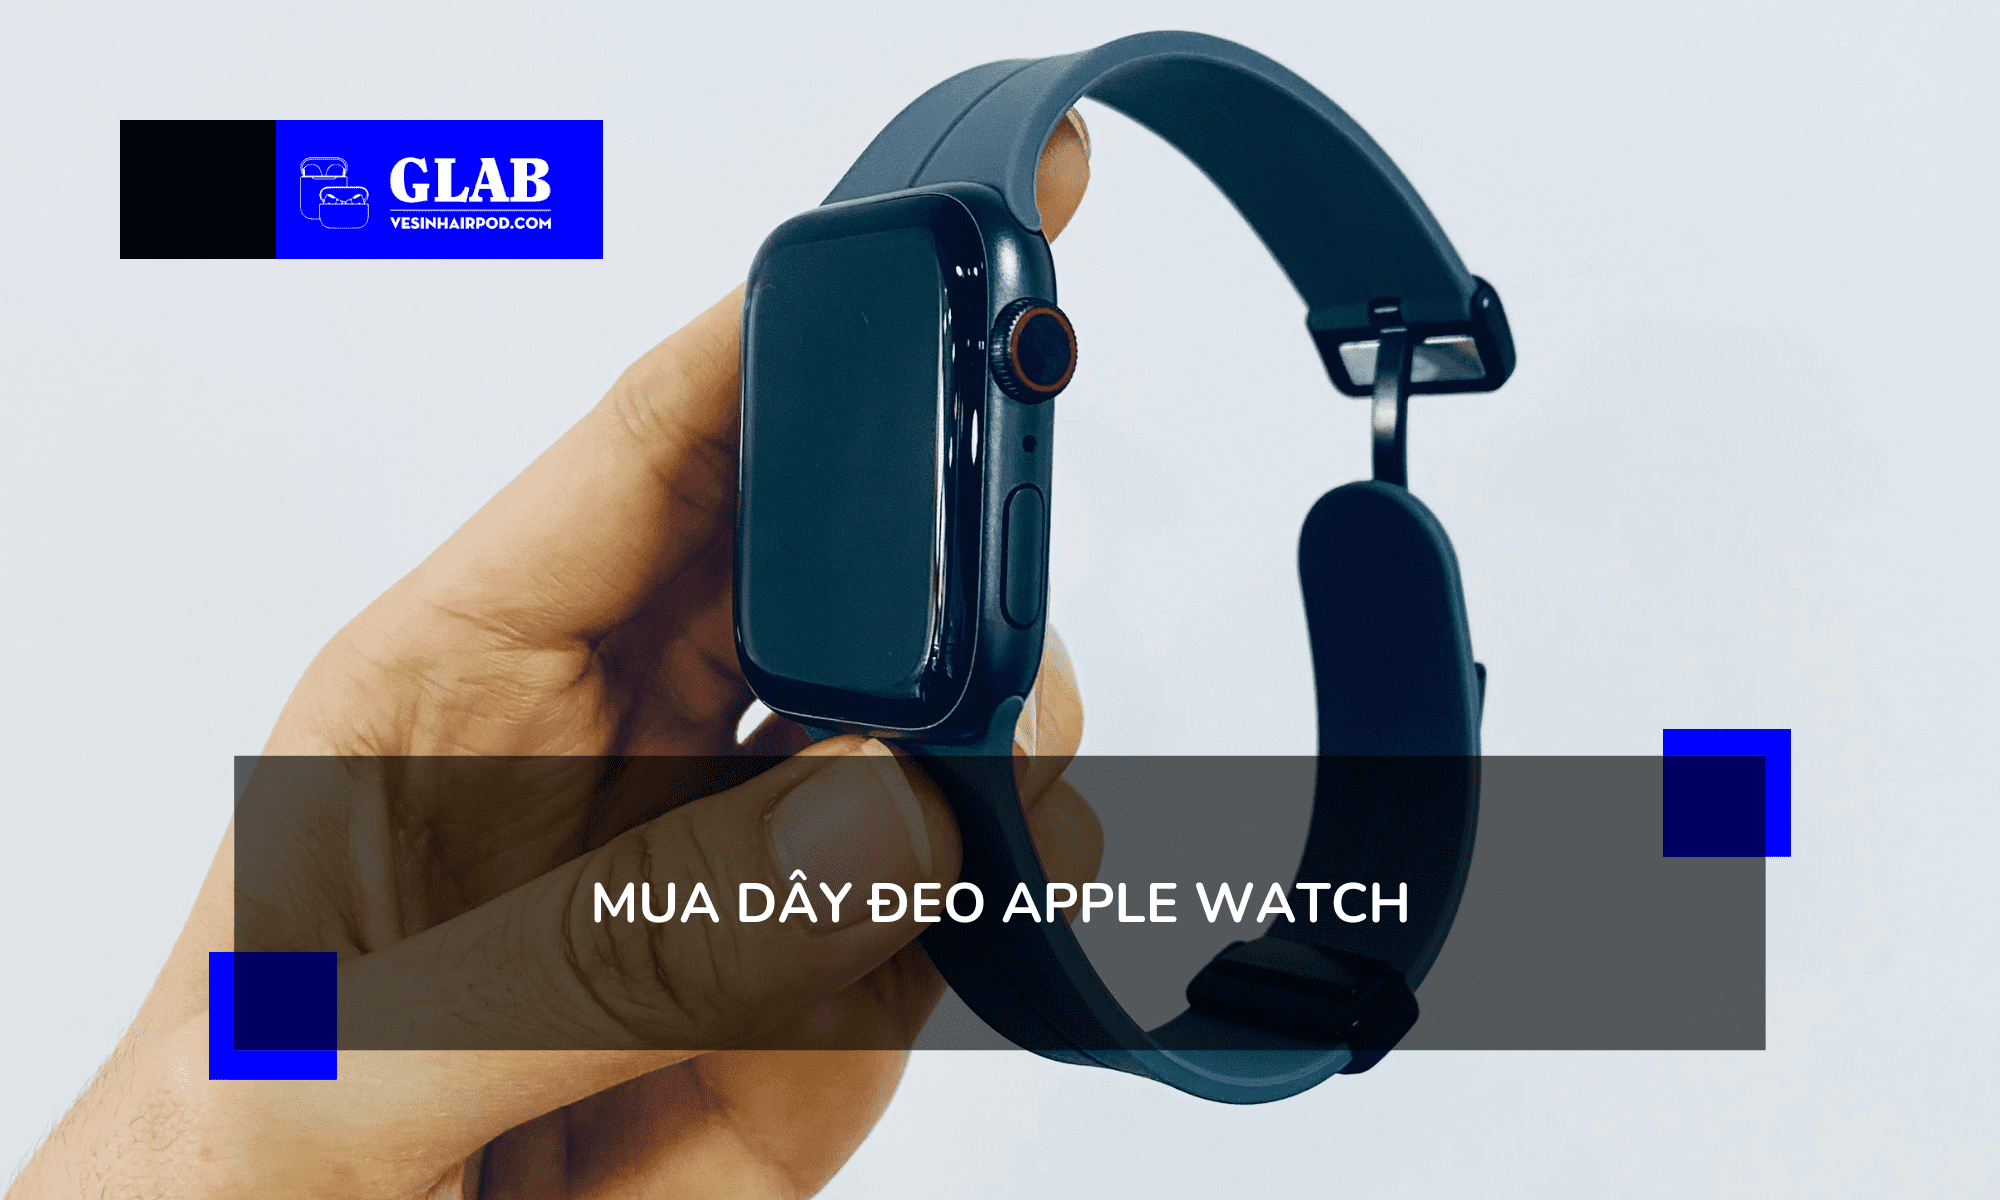 cach-thao-day-dong-ho-apple-watch